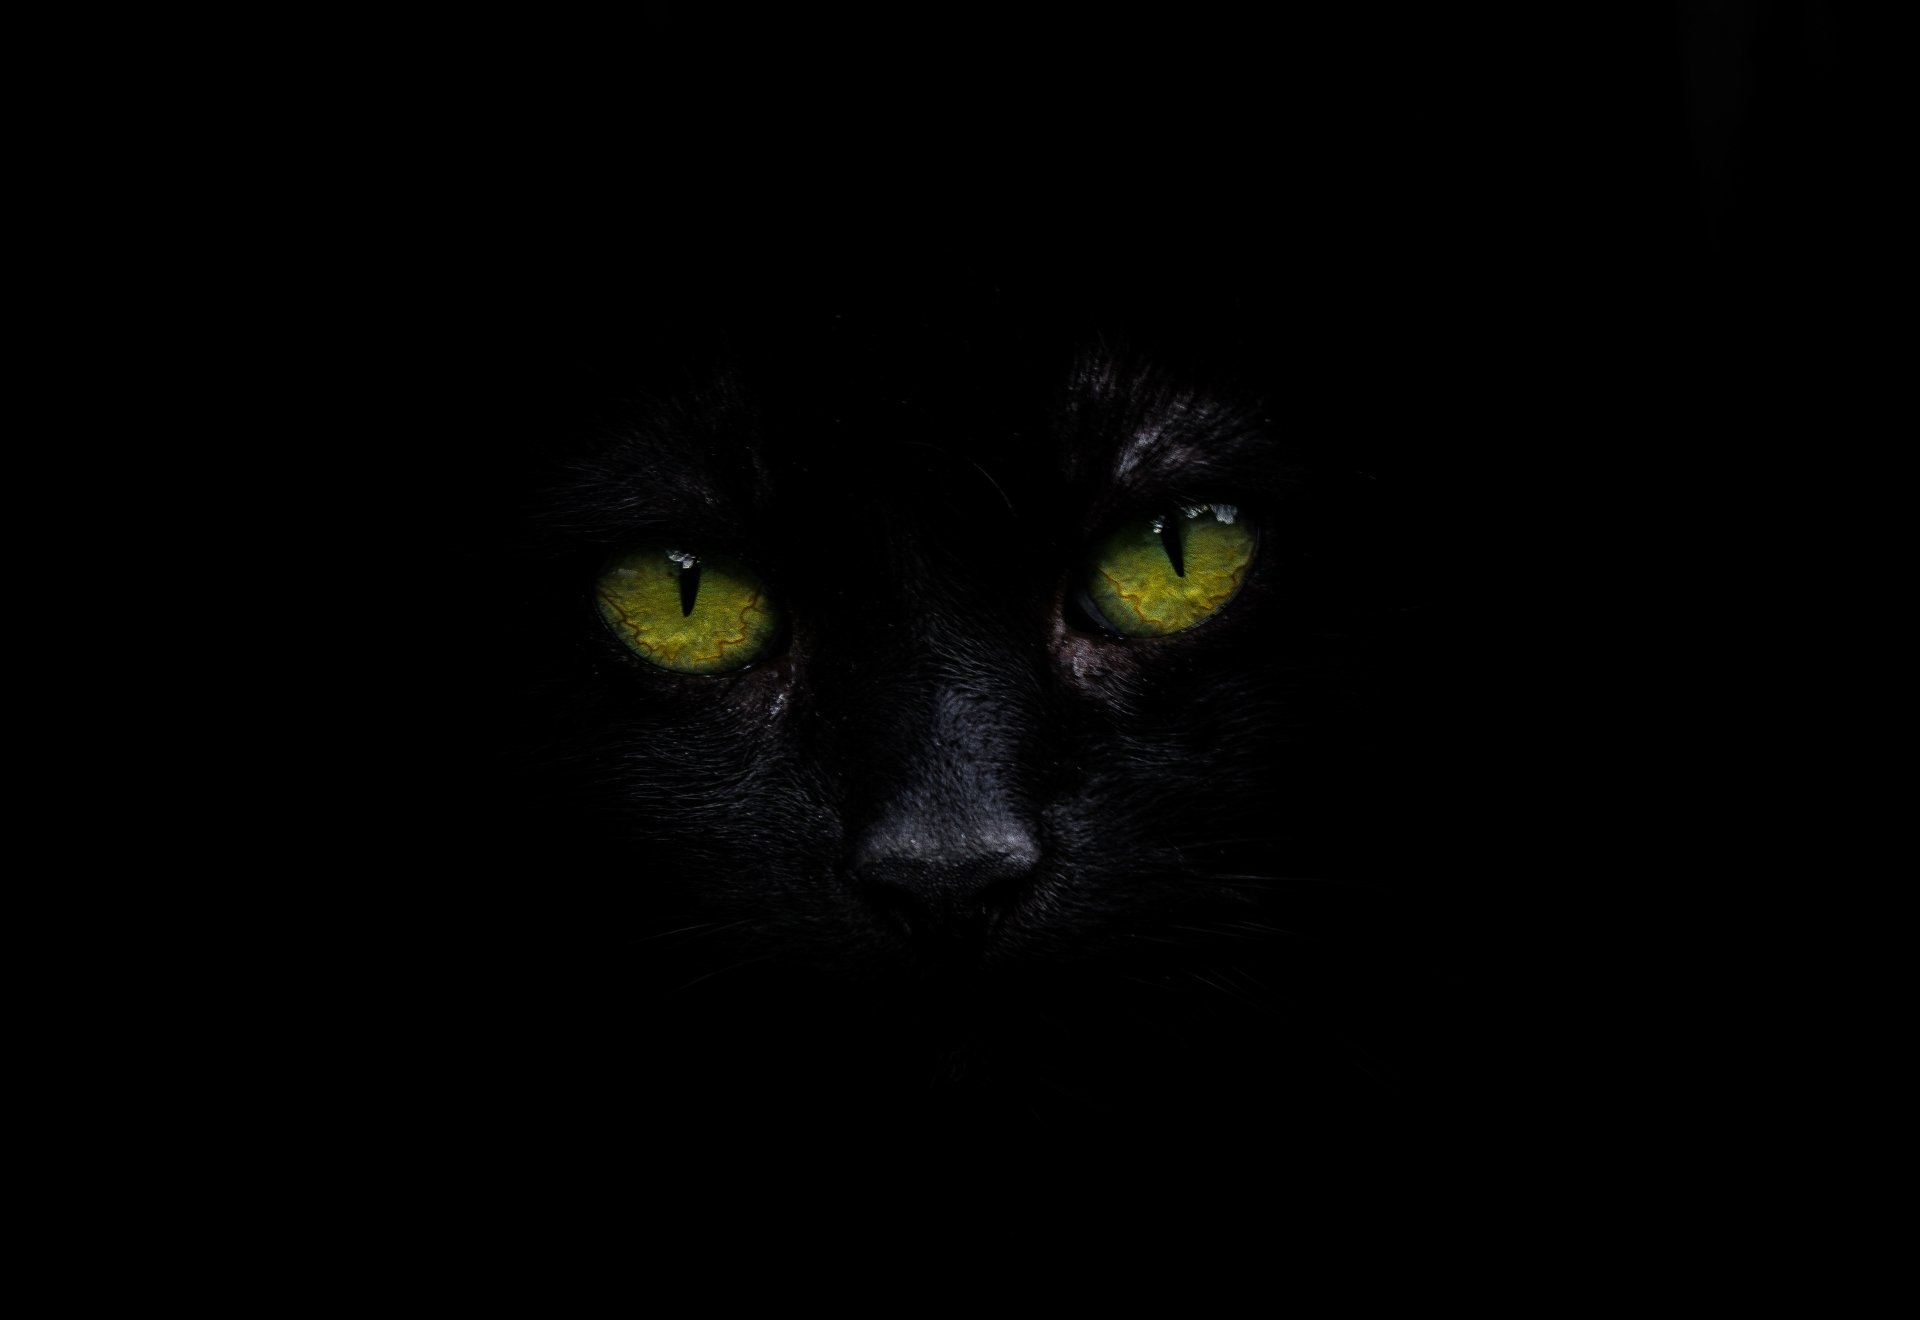 Black Cat with Green Eyes Image - ID: 314595 - Image Abyss